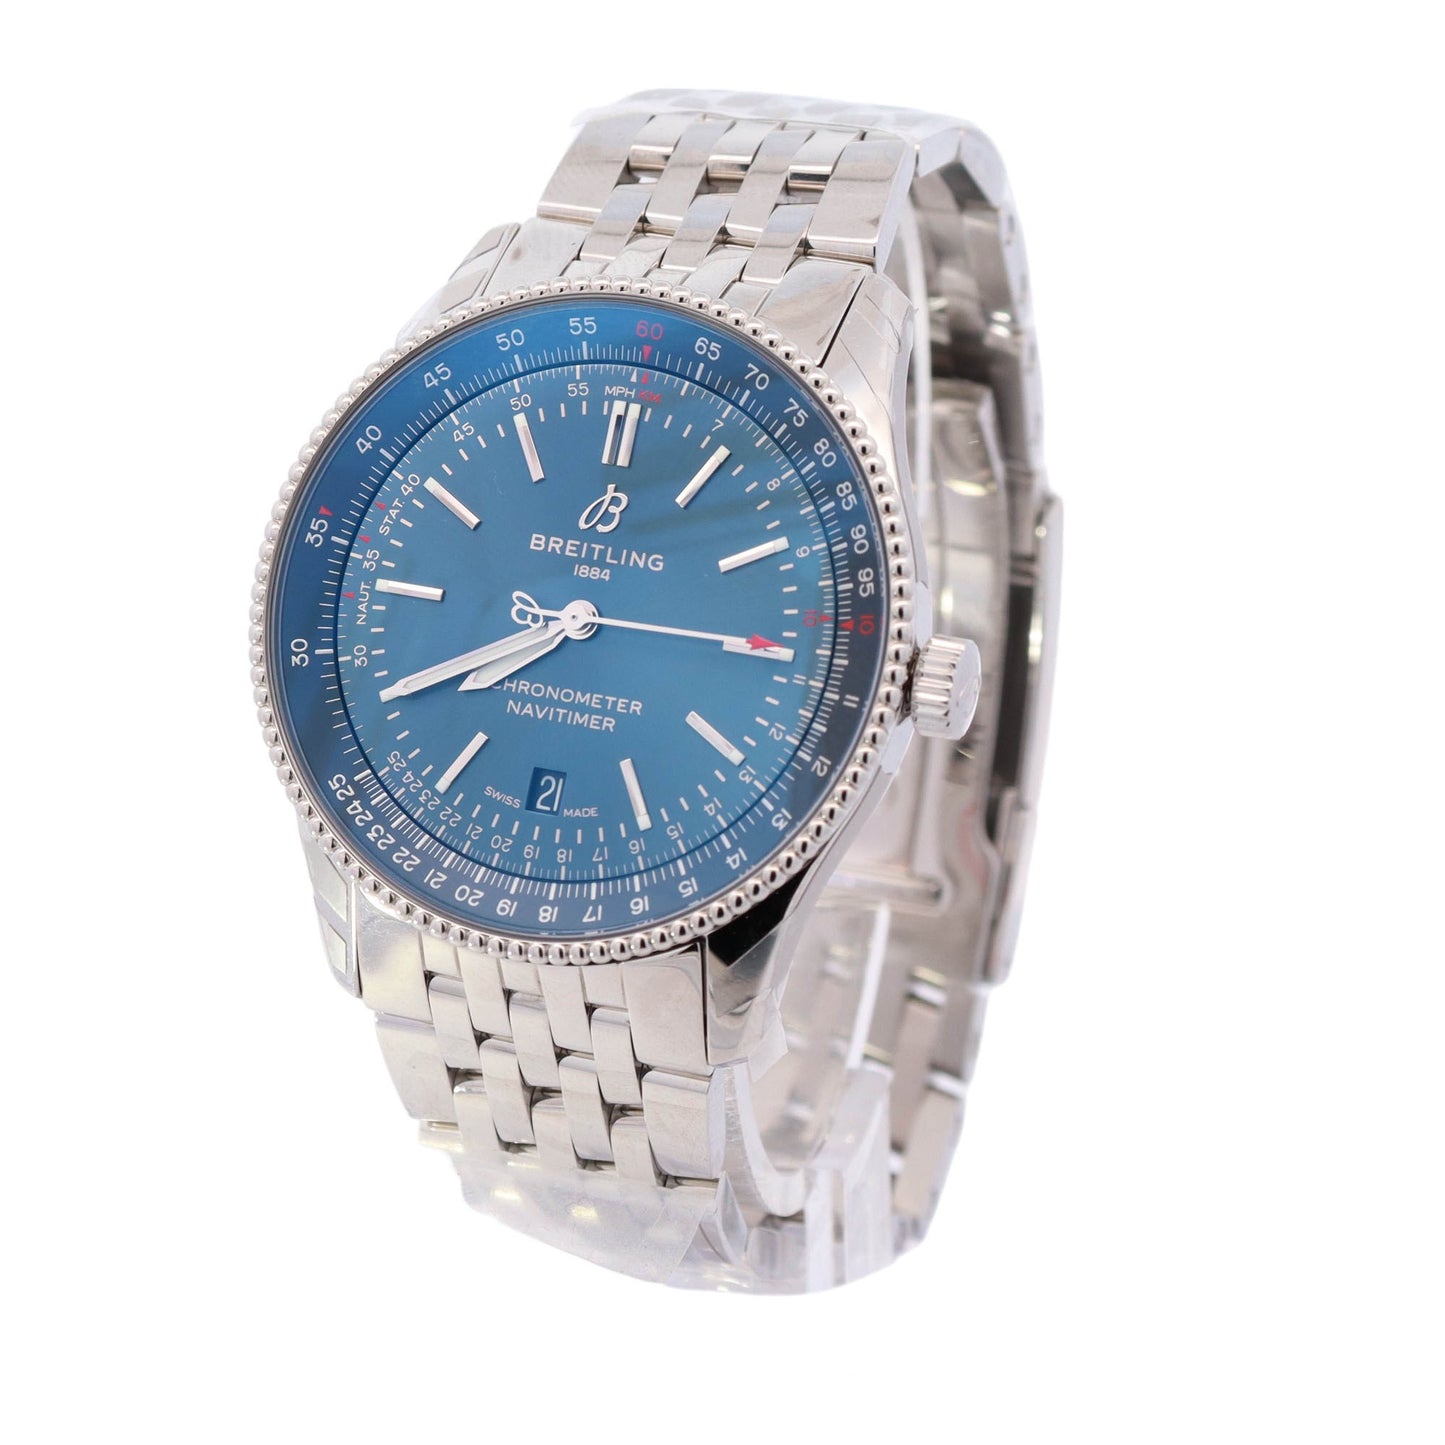 Breitling Navitimer Stainless Steel Case and Bracelet 41mm Blue Stick Dial Watch Reference #: A17326161C1A1 - Happy Jewelers Fine Jewelry Lifetime Warranty